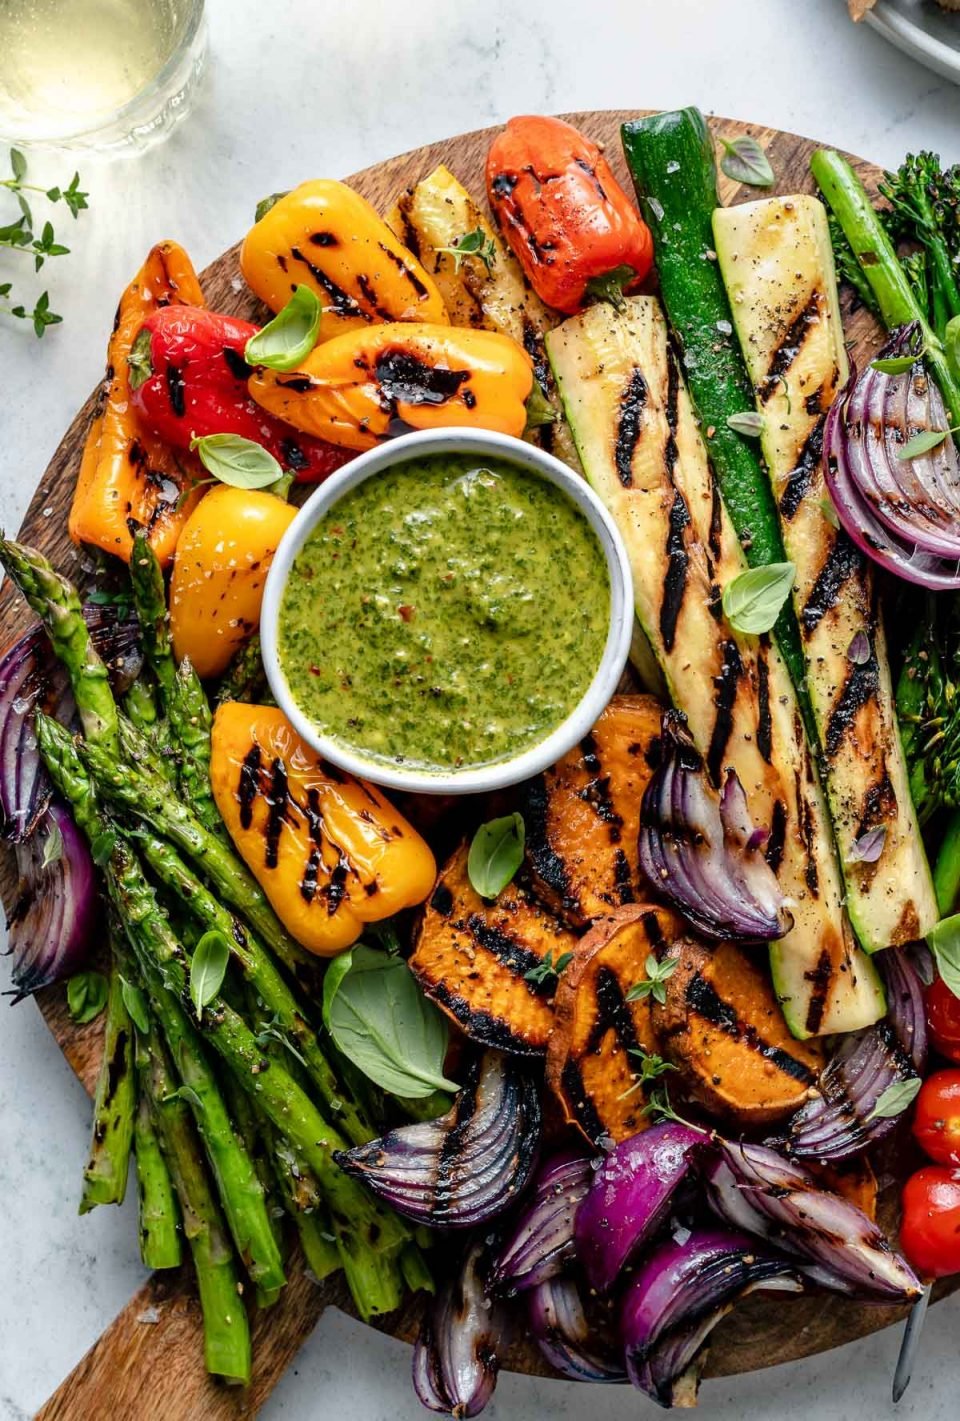 Easy Grilled Vegetable Platter with Chimichurri Sauce (Vegan)